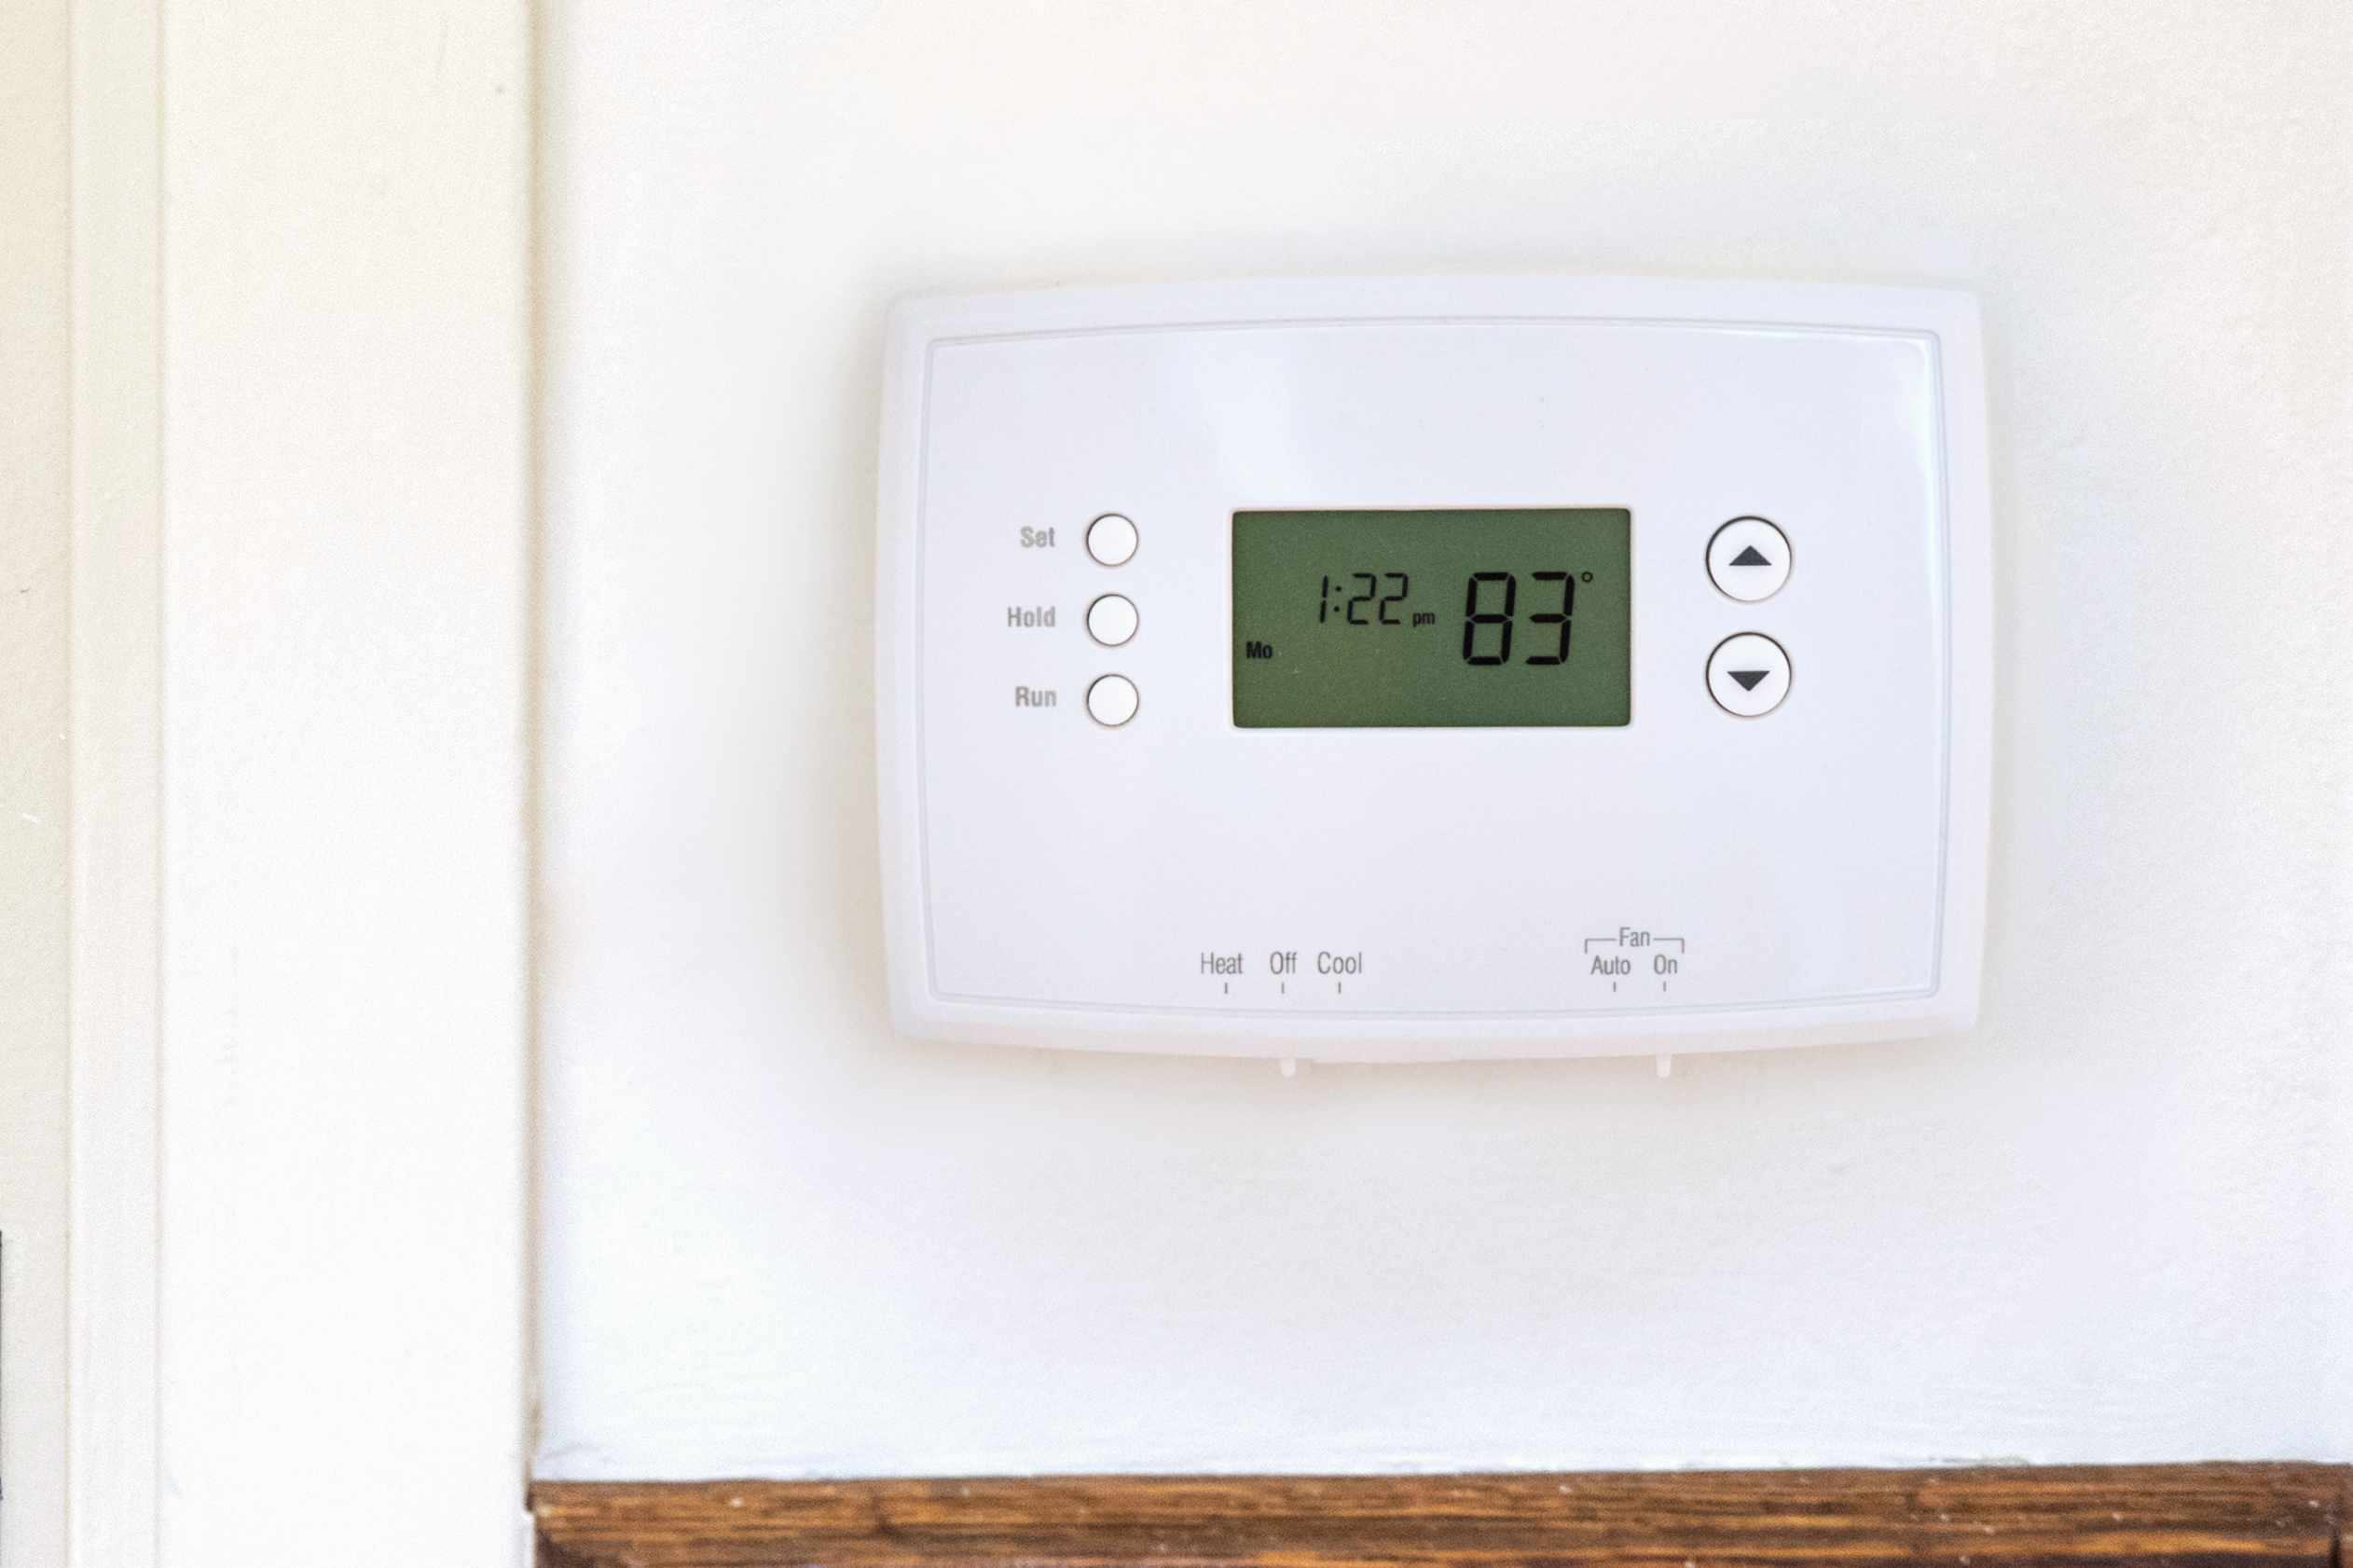 How To Change Old Thermostat To Digital